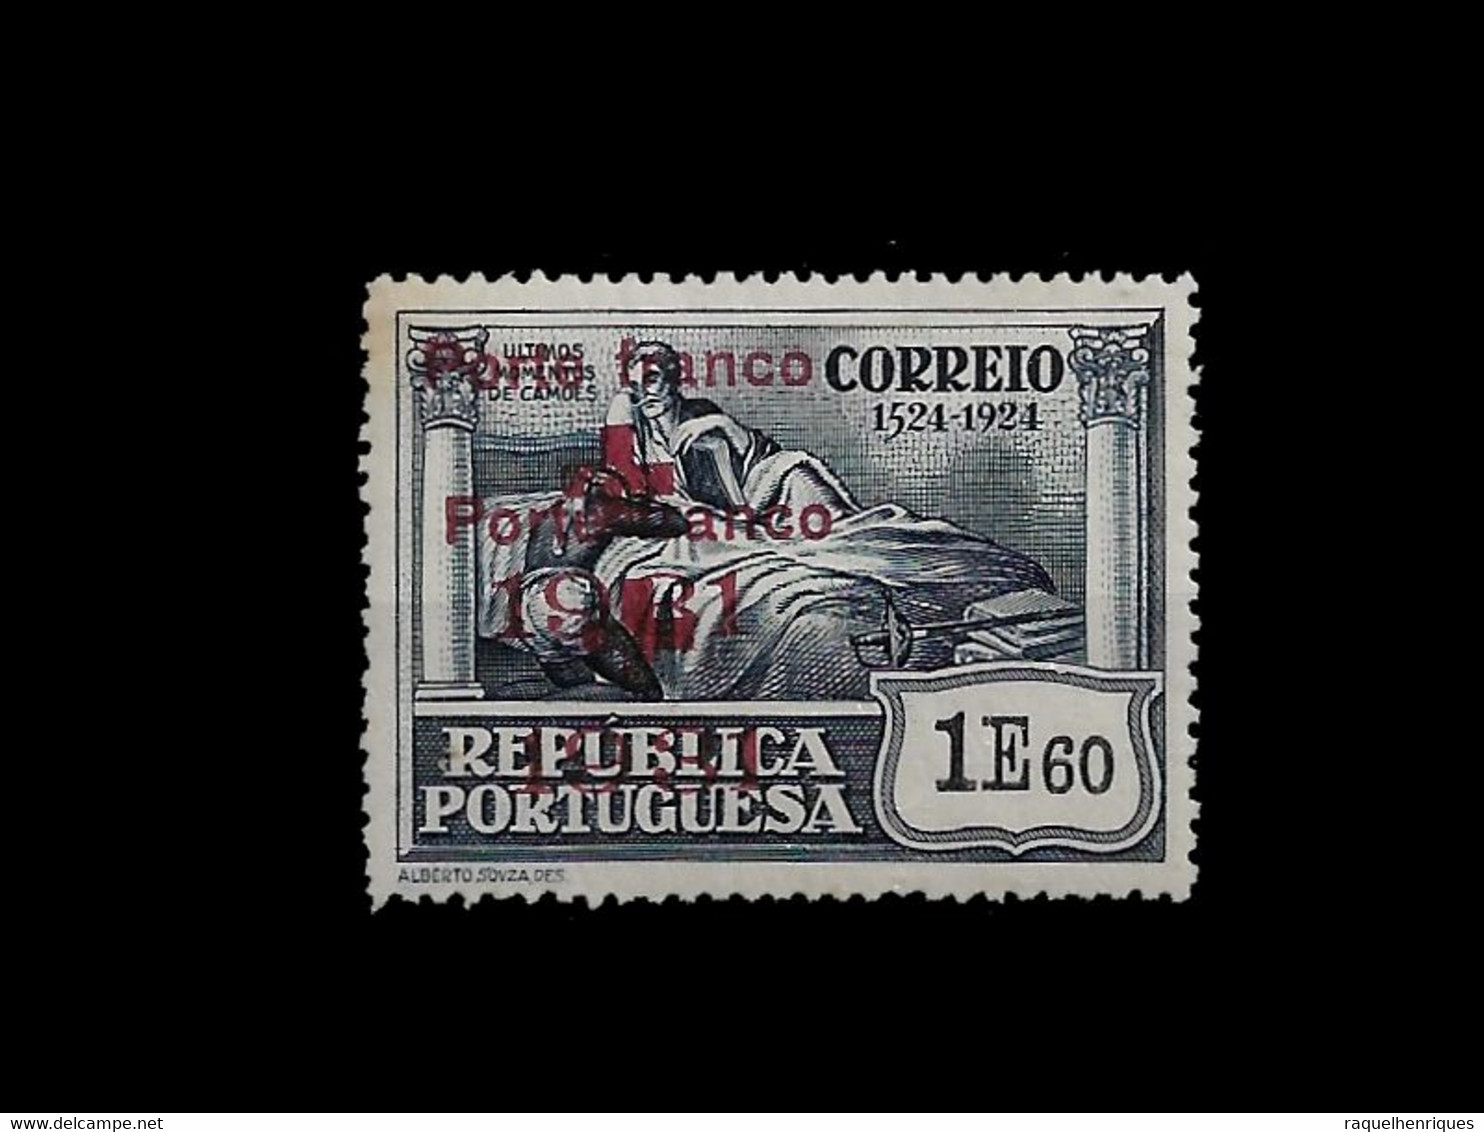 PORTUGAL PORTE FRANCO - 1931 ERROR DOUBLE SURCHARGED MNH (PLB#01-120) - Unused Stamps